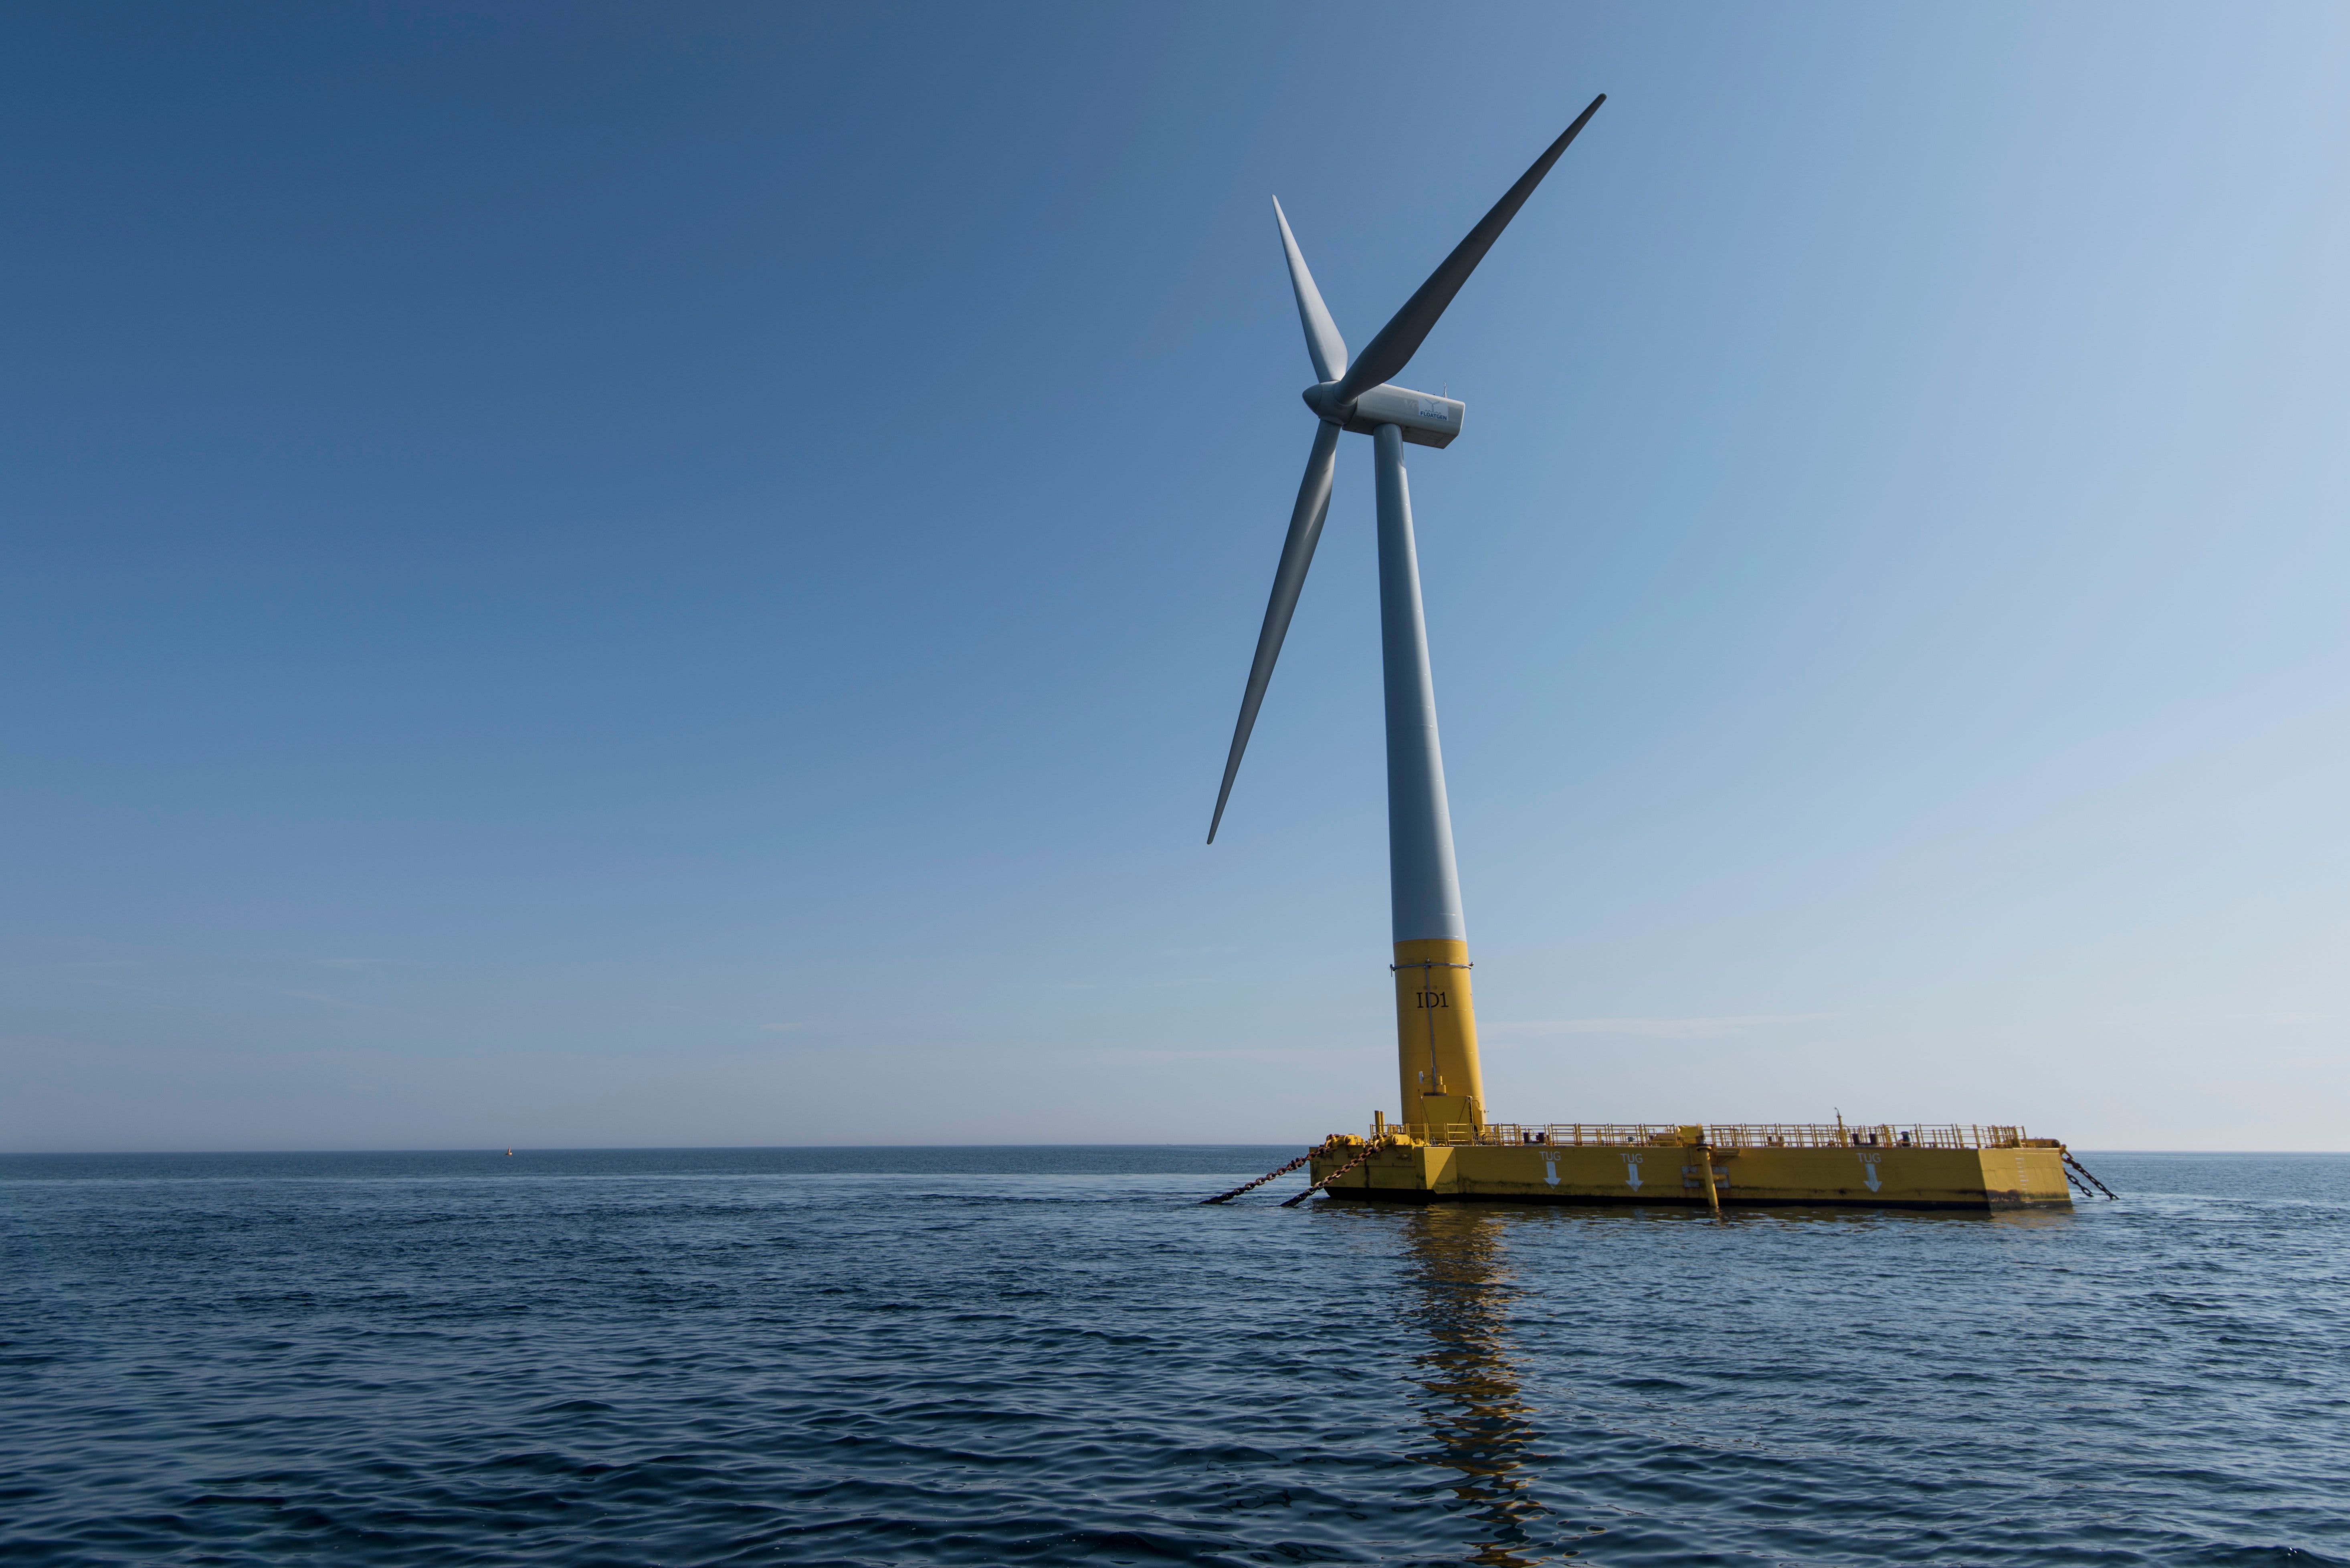 Plans for floating wind energy projects off UK’s coastline get millions in funding boost